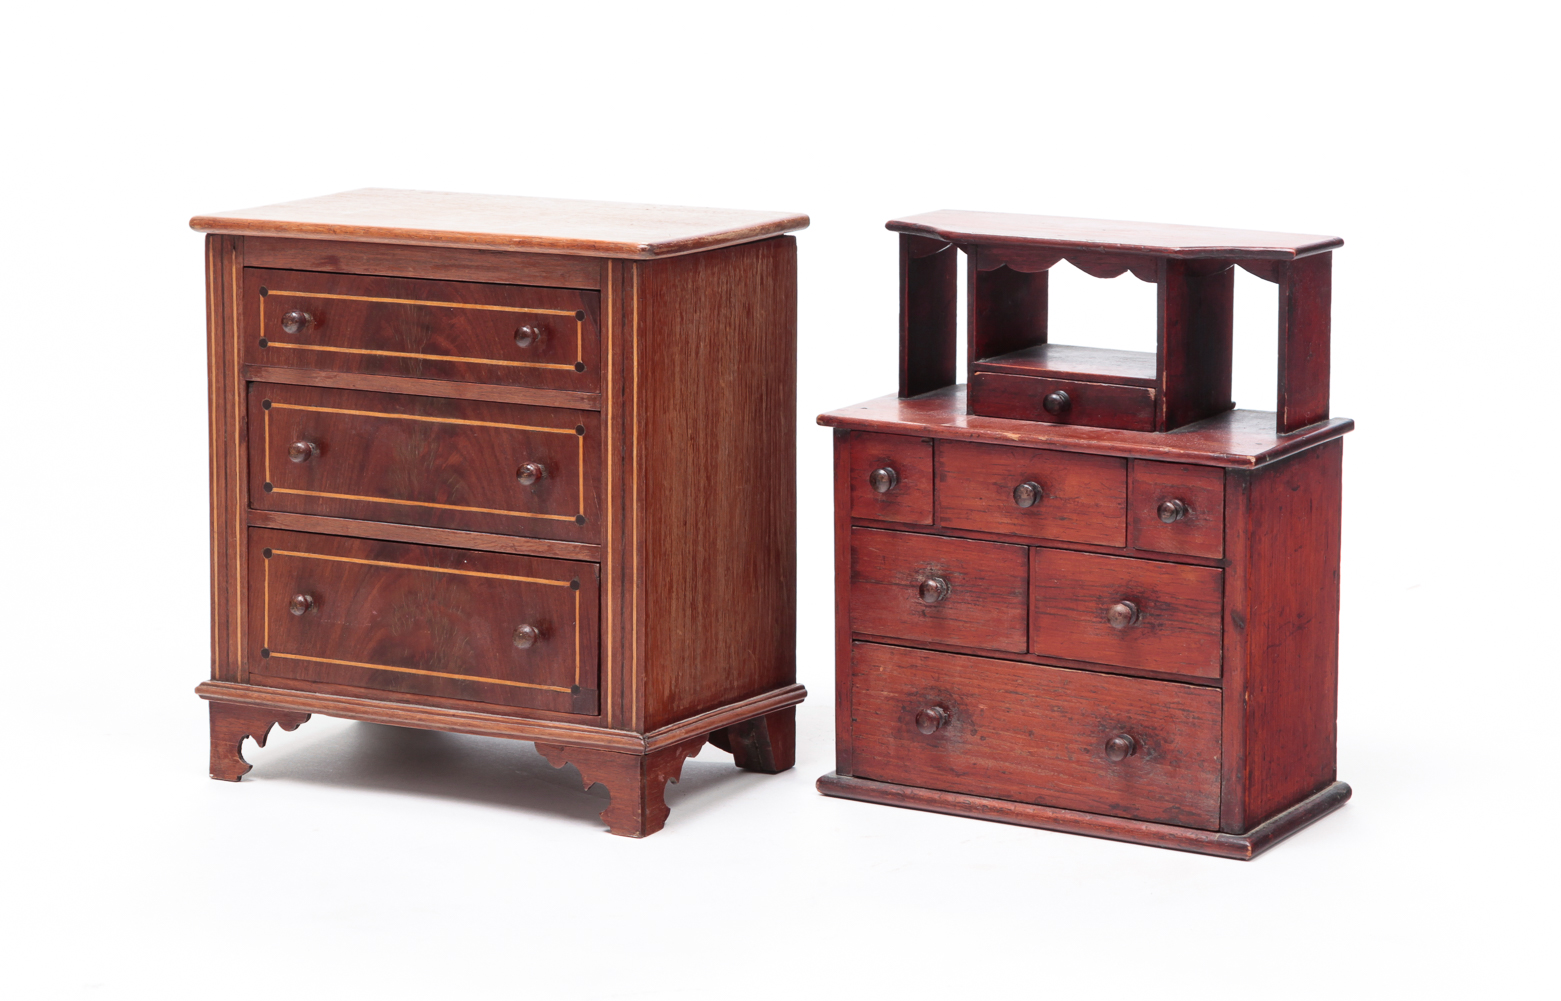 TWO AMERICAN MINIATURE CHESTS.